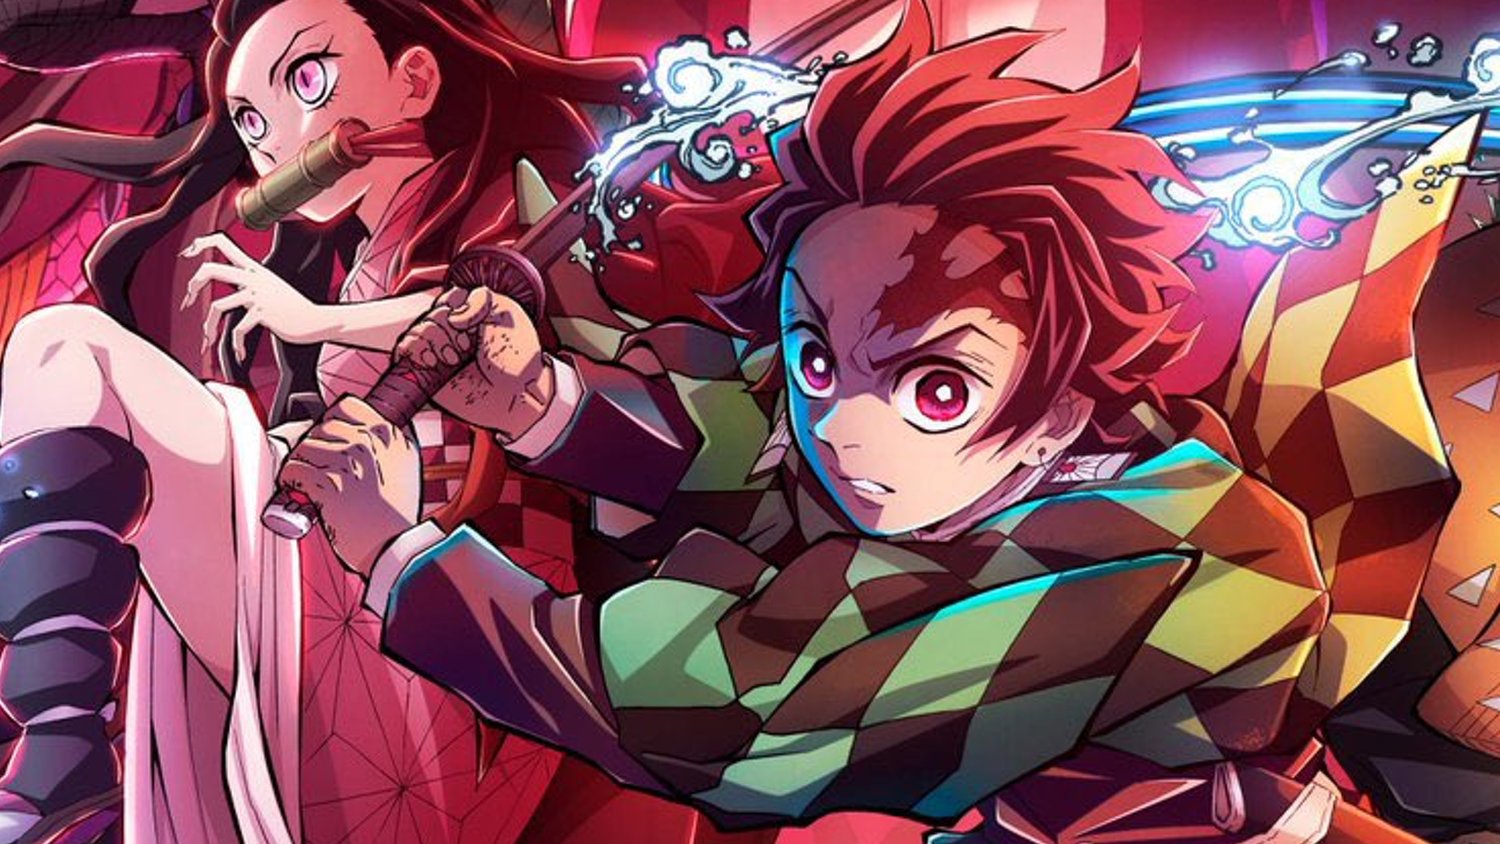 Demon Slayer Season 3 Release Date Confirmed With New Trailer